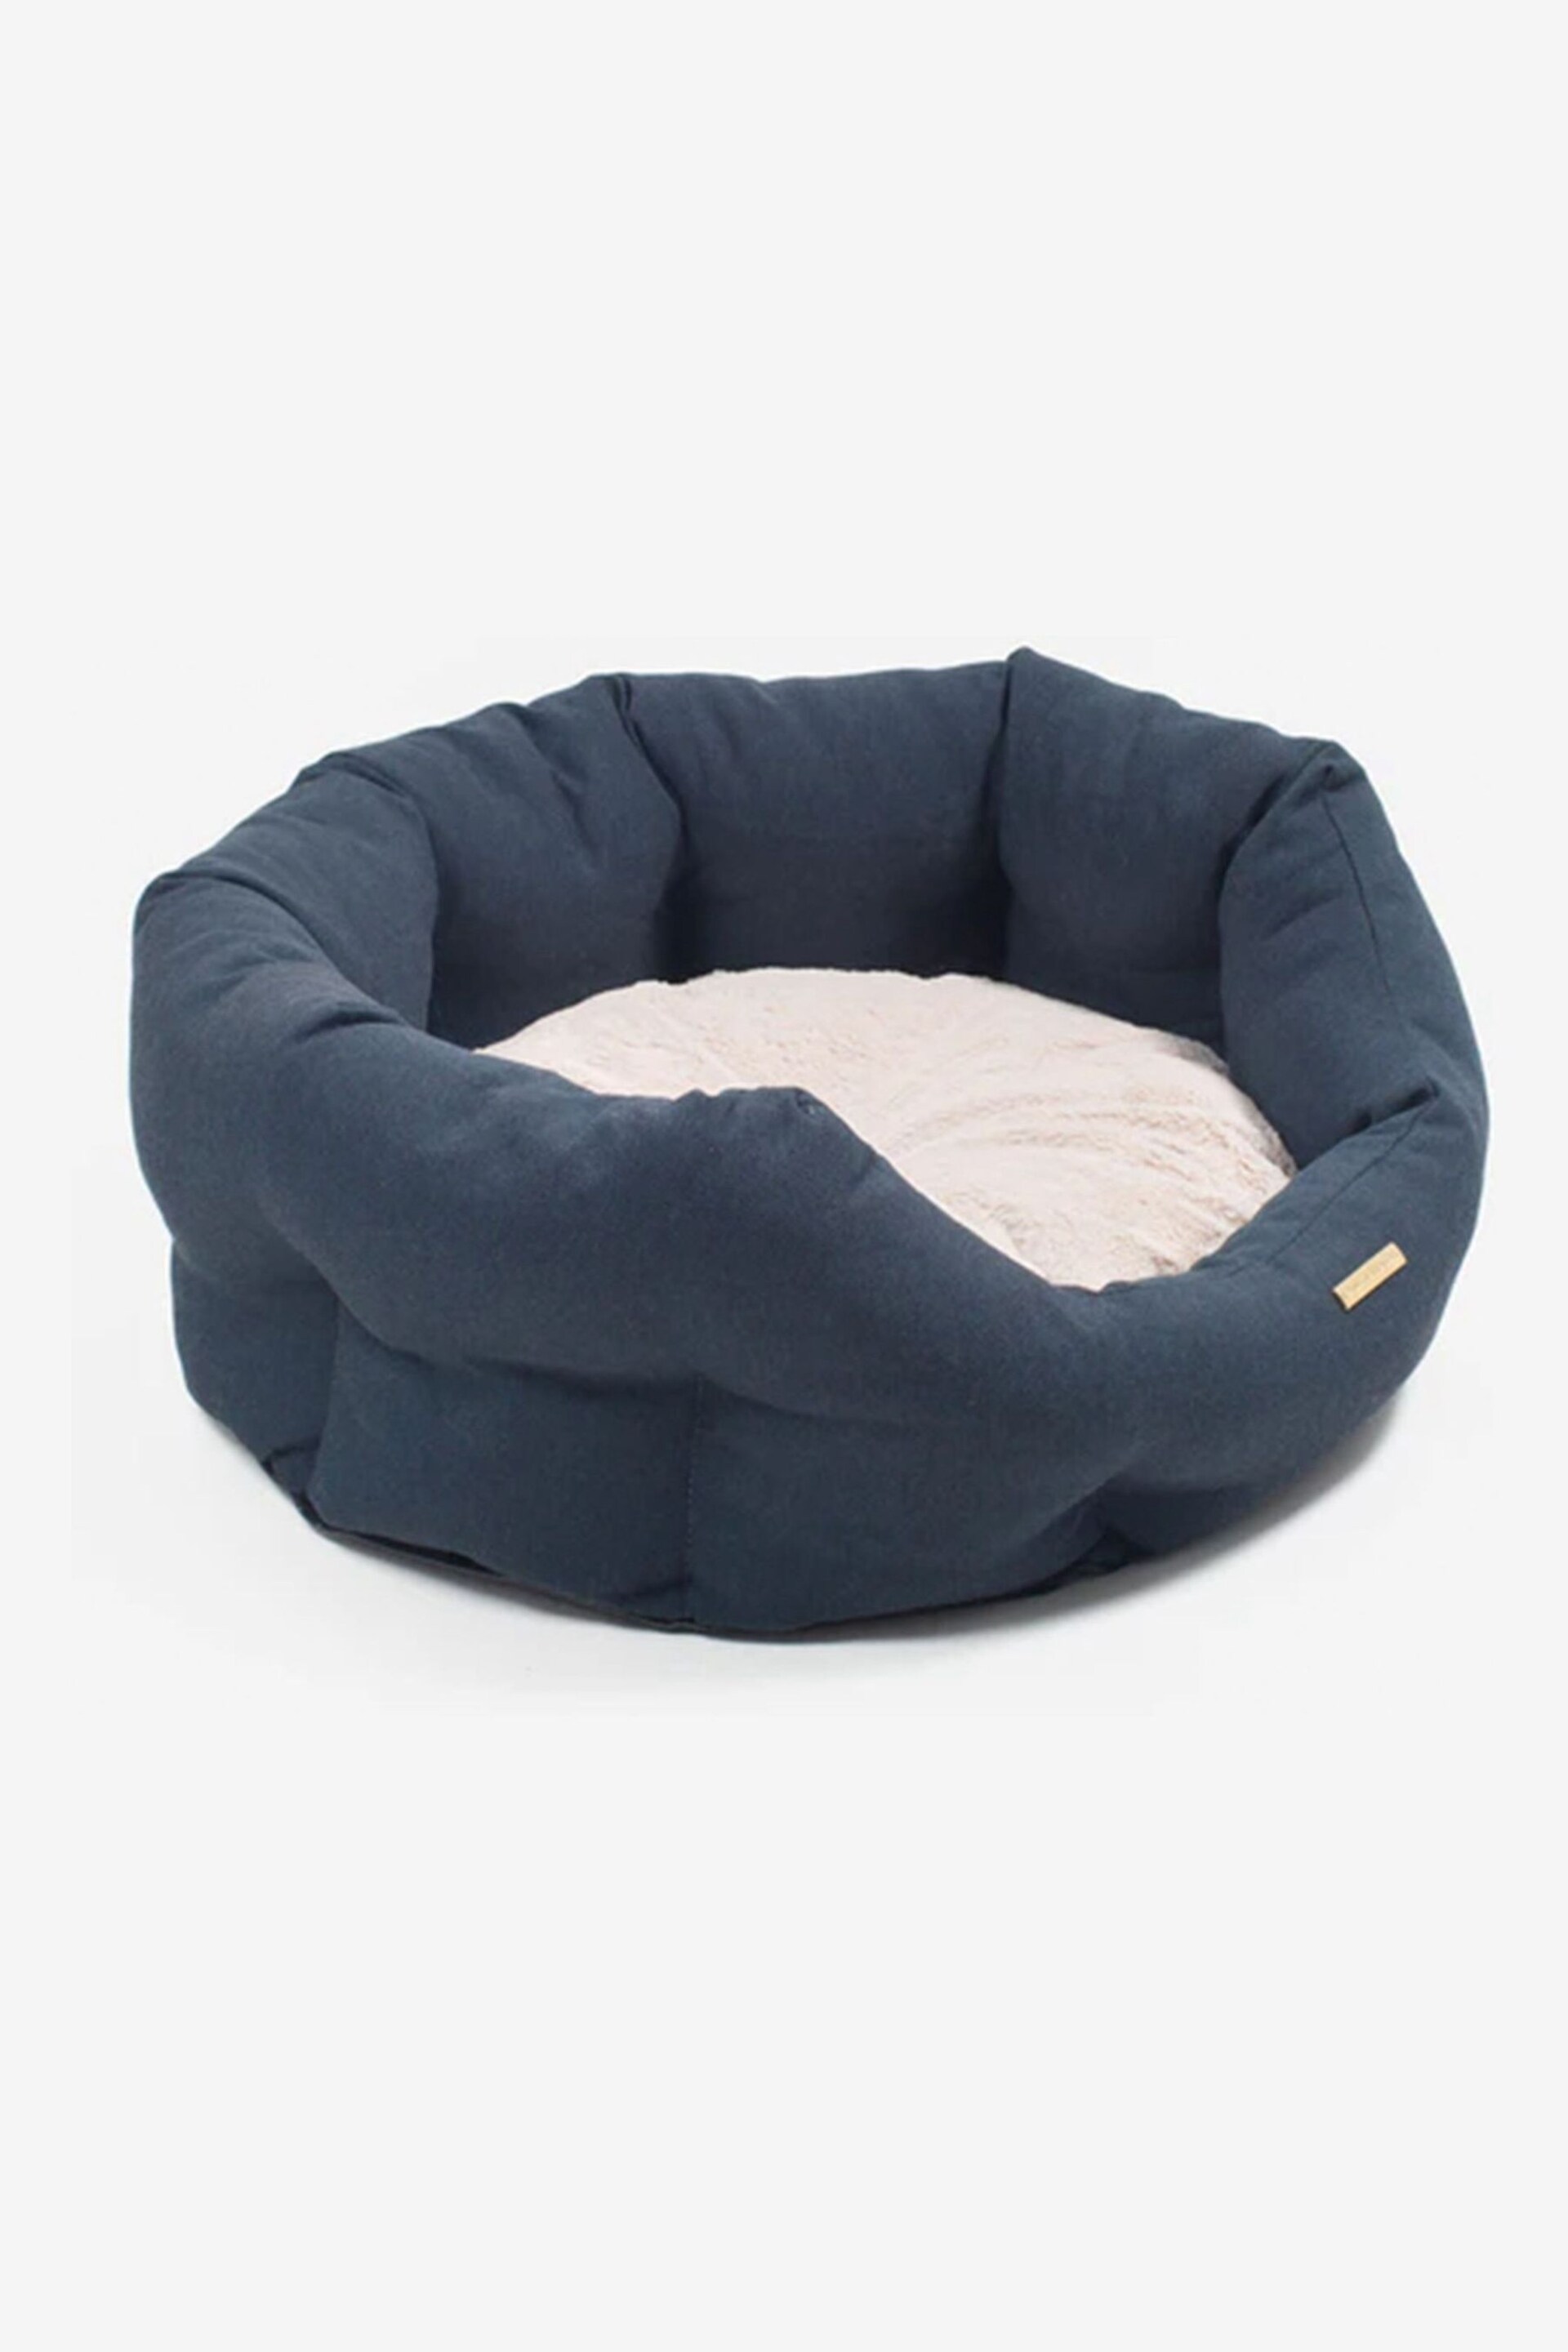 Lords and Labradors Blue Essentials Twill Oval Dog Bed - Image 5 of 5